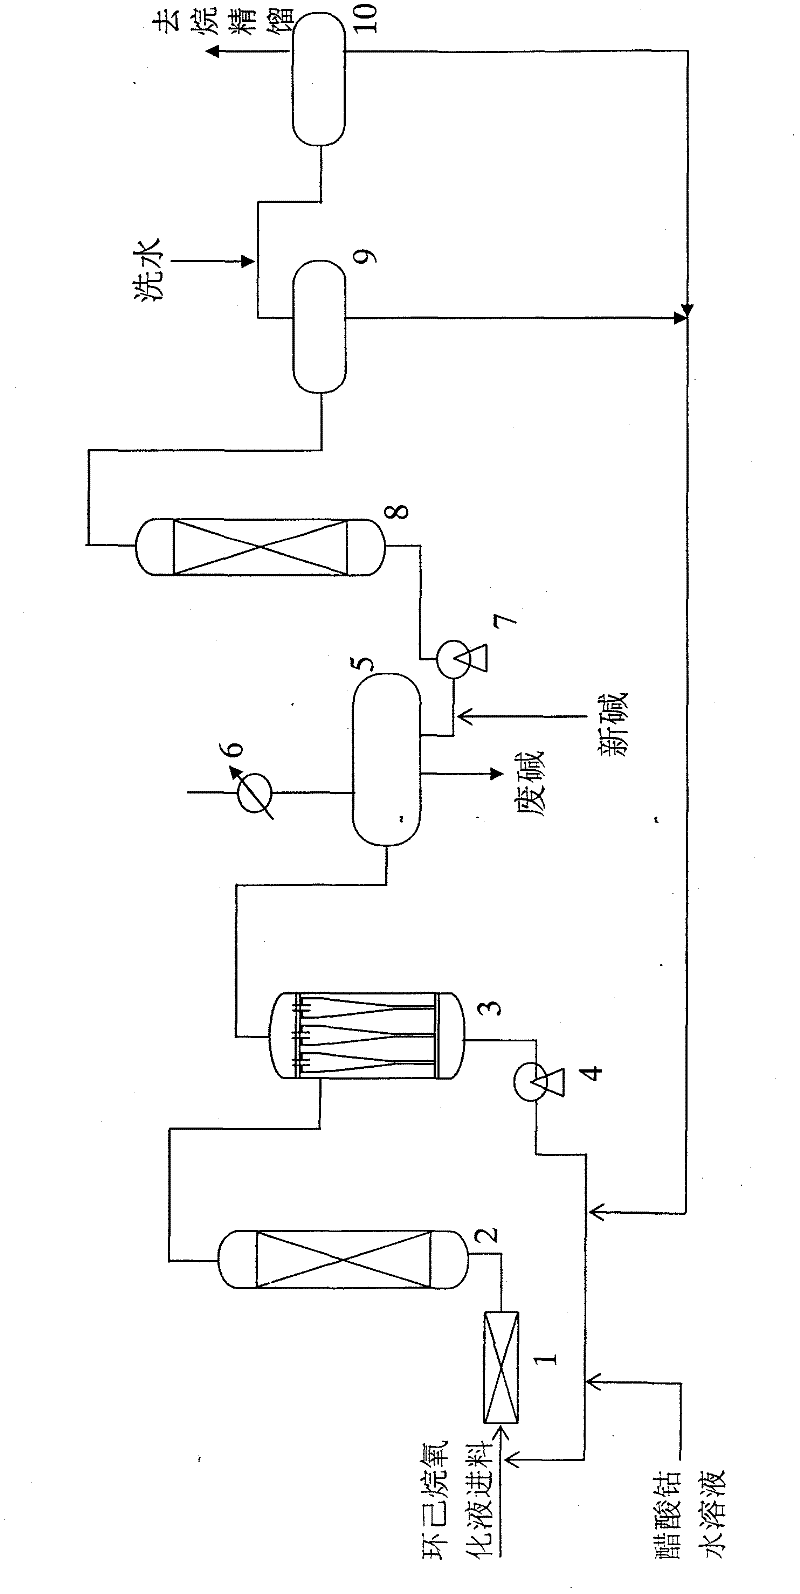 Improved process for producing cyclohexanol and pimelinketone